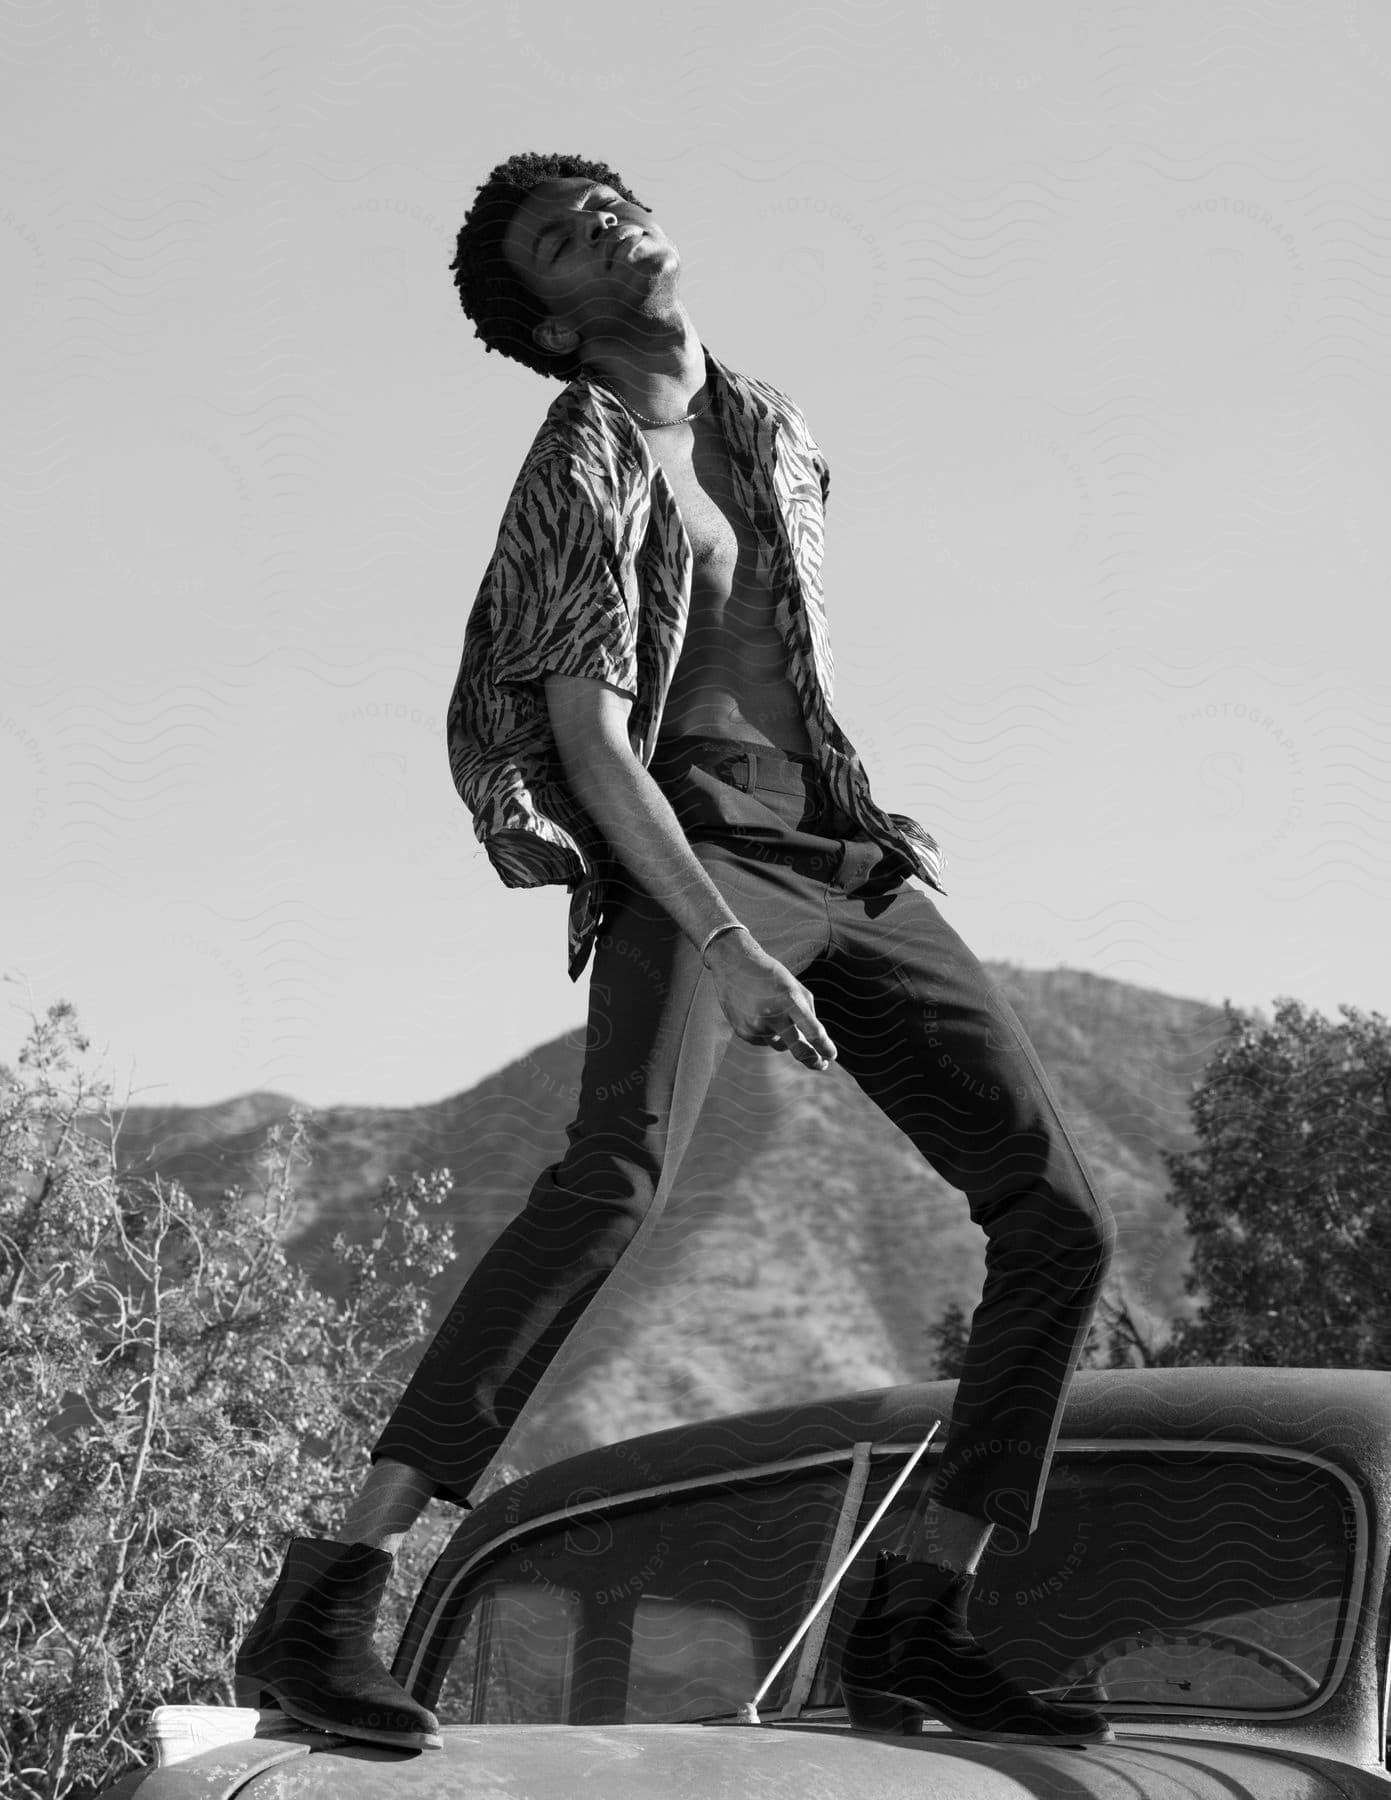 A man poses on the hood of a vintage car in the california desert